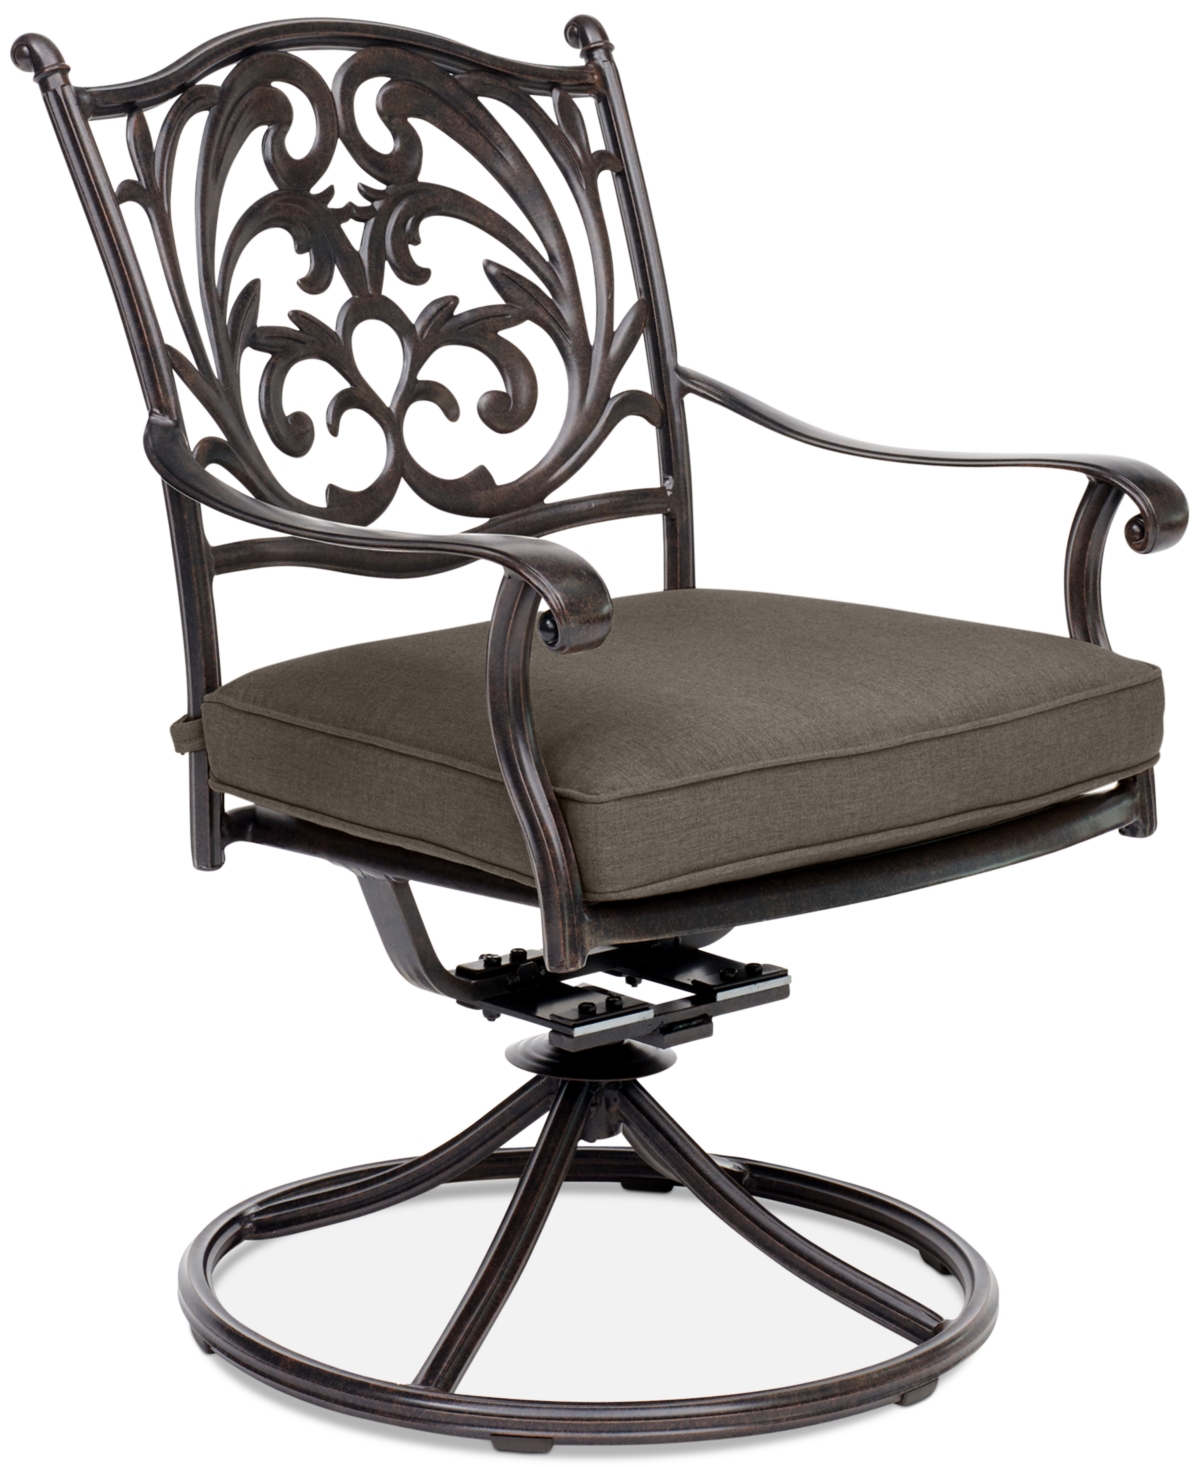 Agio Set Of 6 Chateau Aluminum Outdoor Dining Swivel Rockers With Outdoor Cushion, Created For Macy's In Outdura Storm Steel